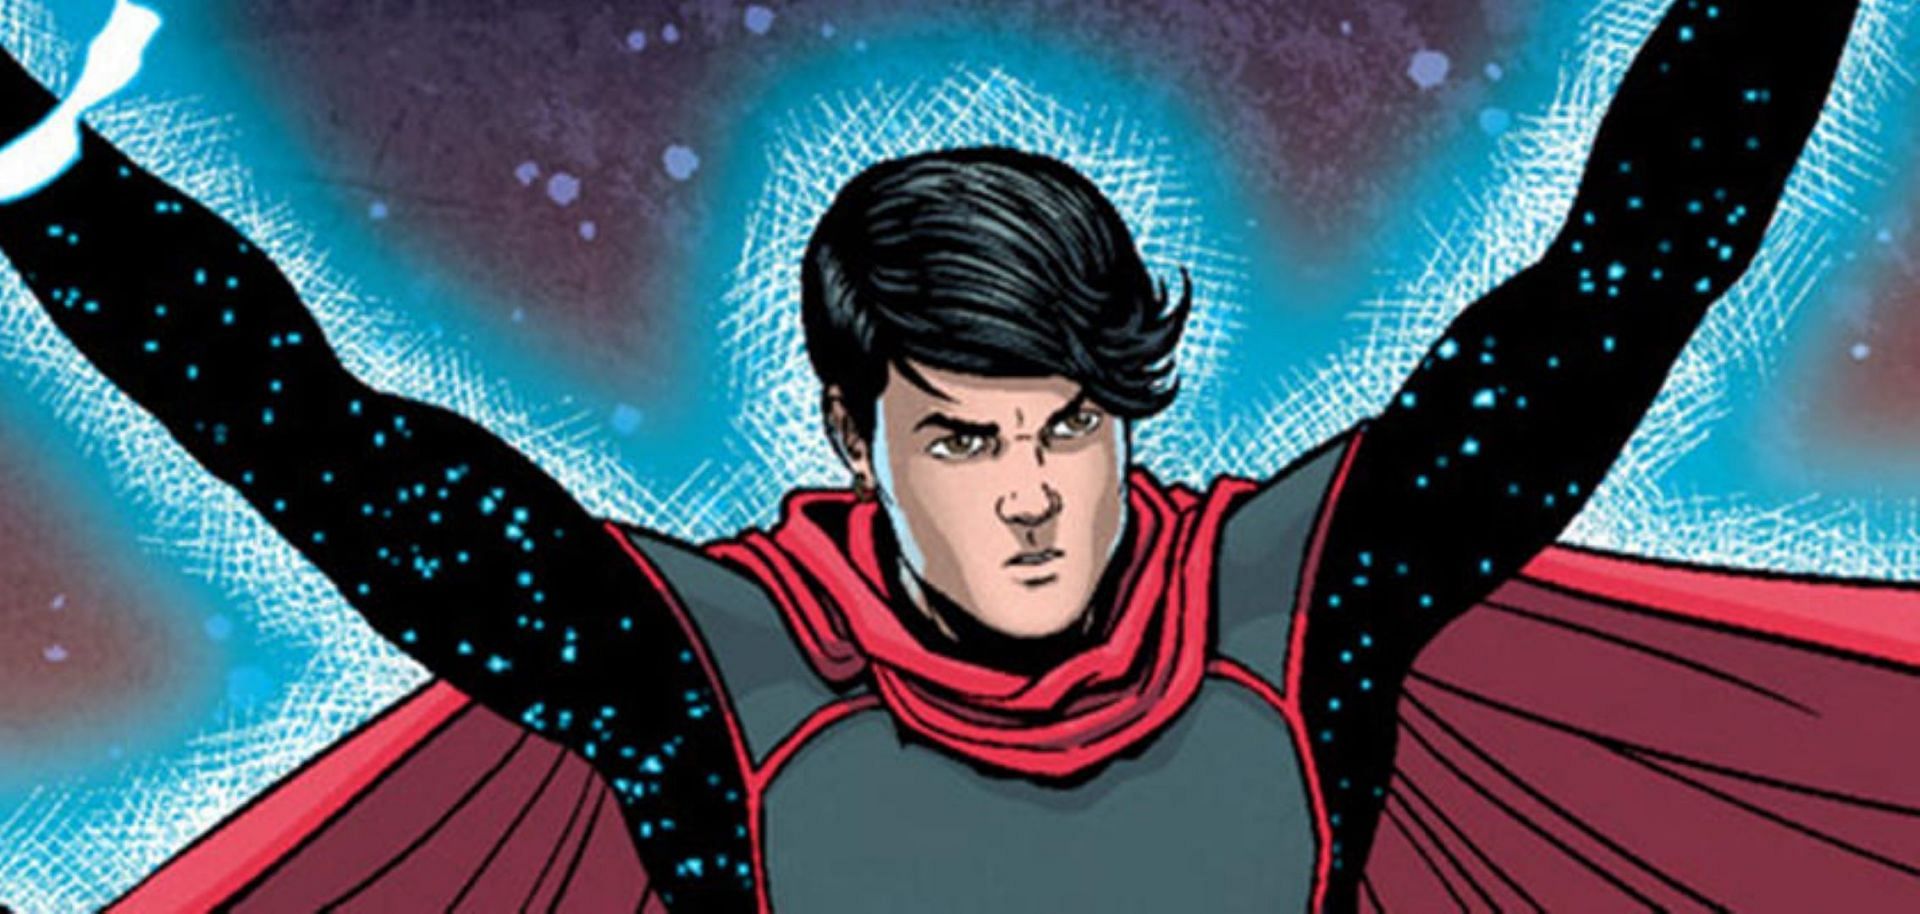 Wiccan is the son of Scarlet Witch and Vision (Image via Marvel)